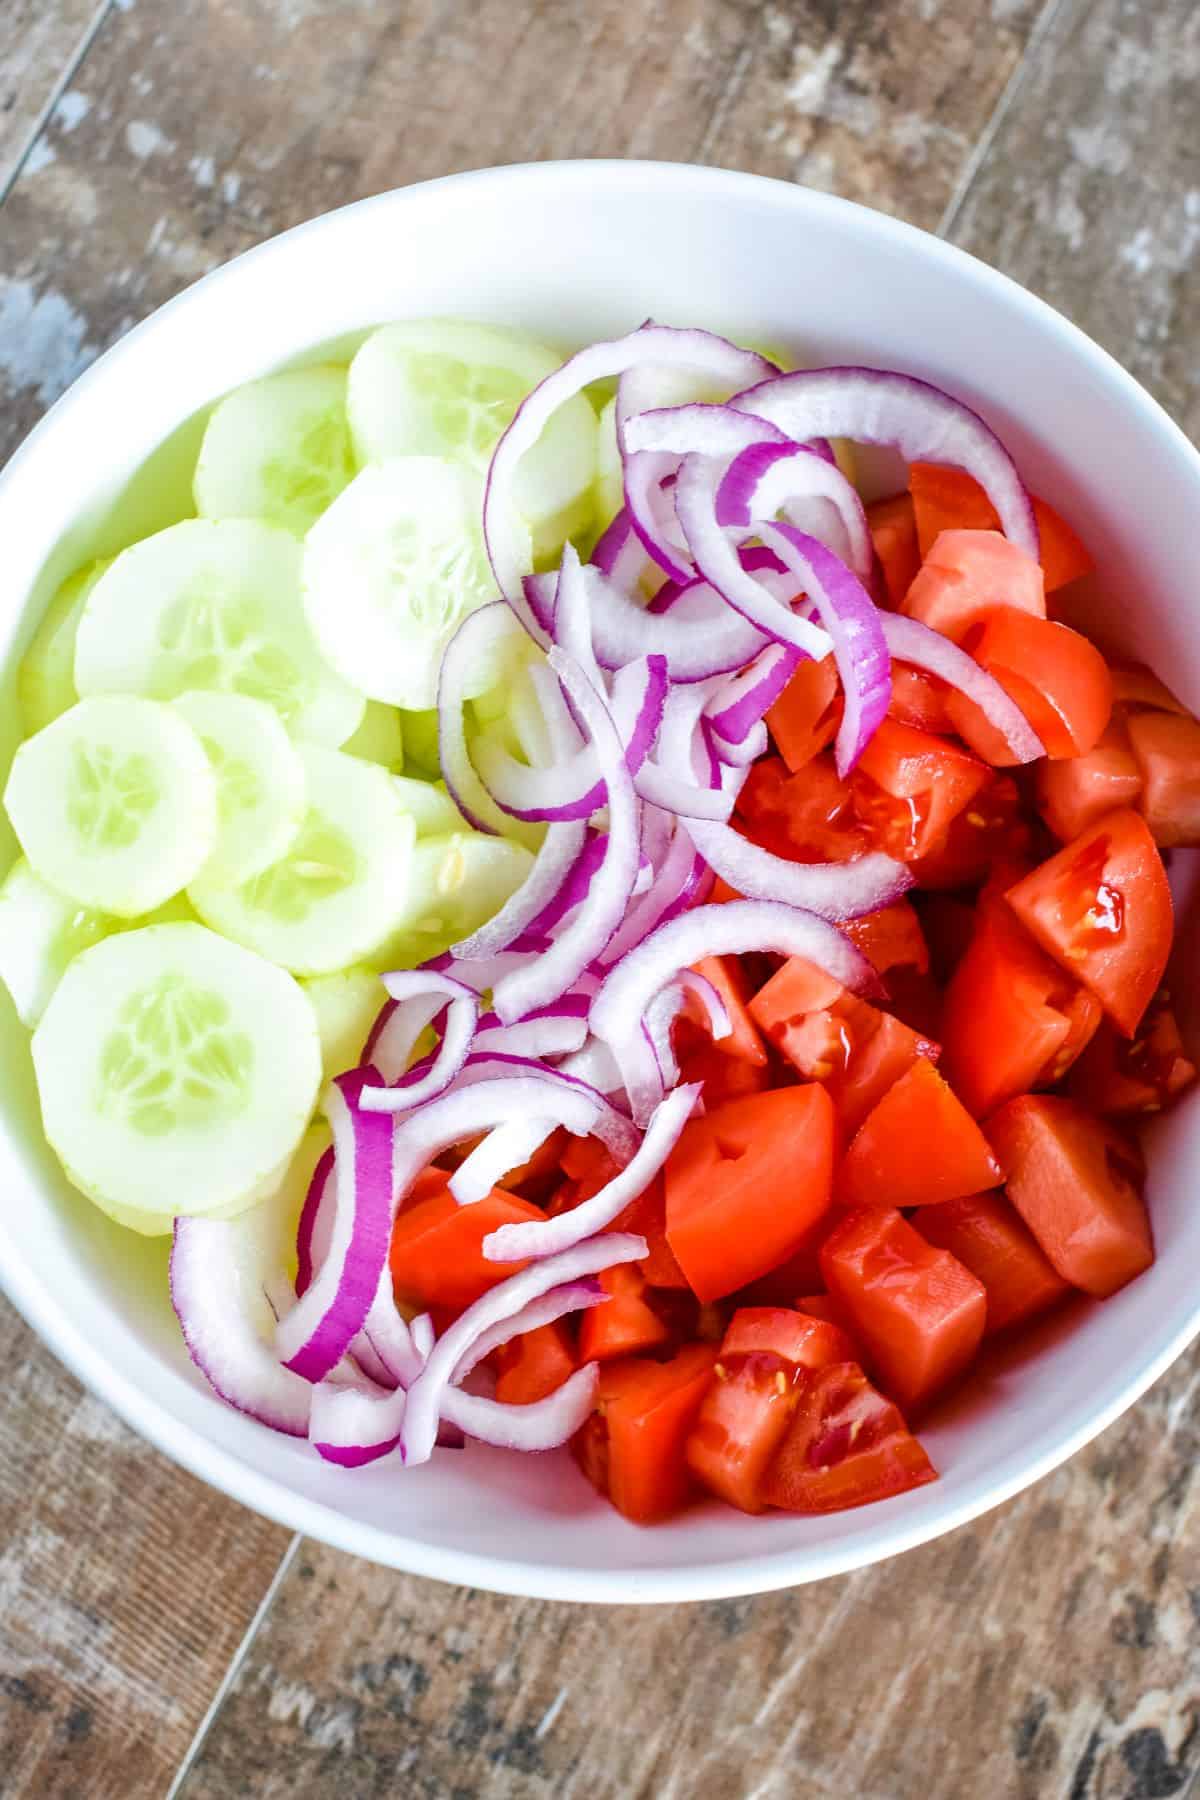 tomatoes, onion and cucumbers added to a mixing bowl.